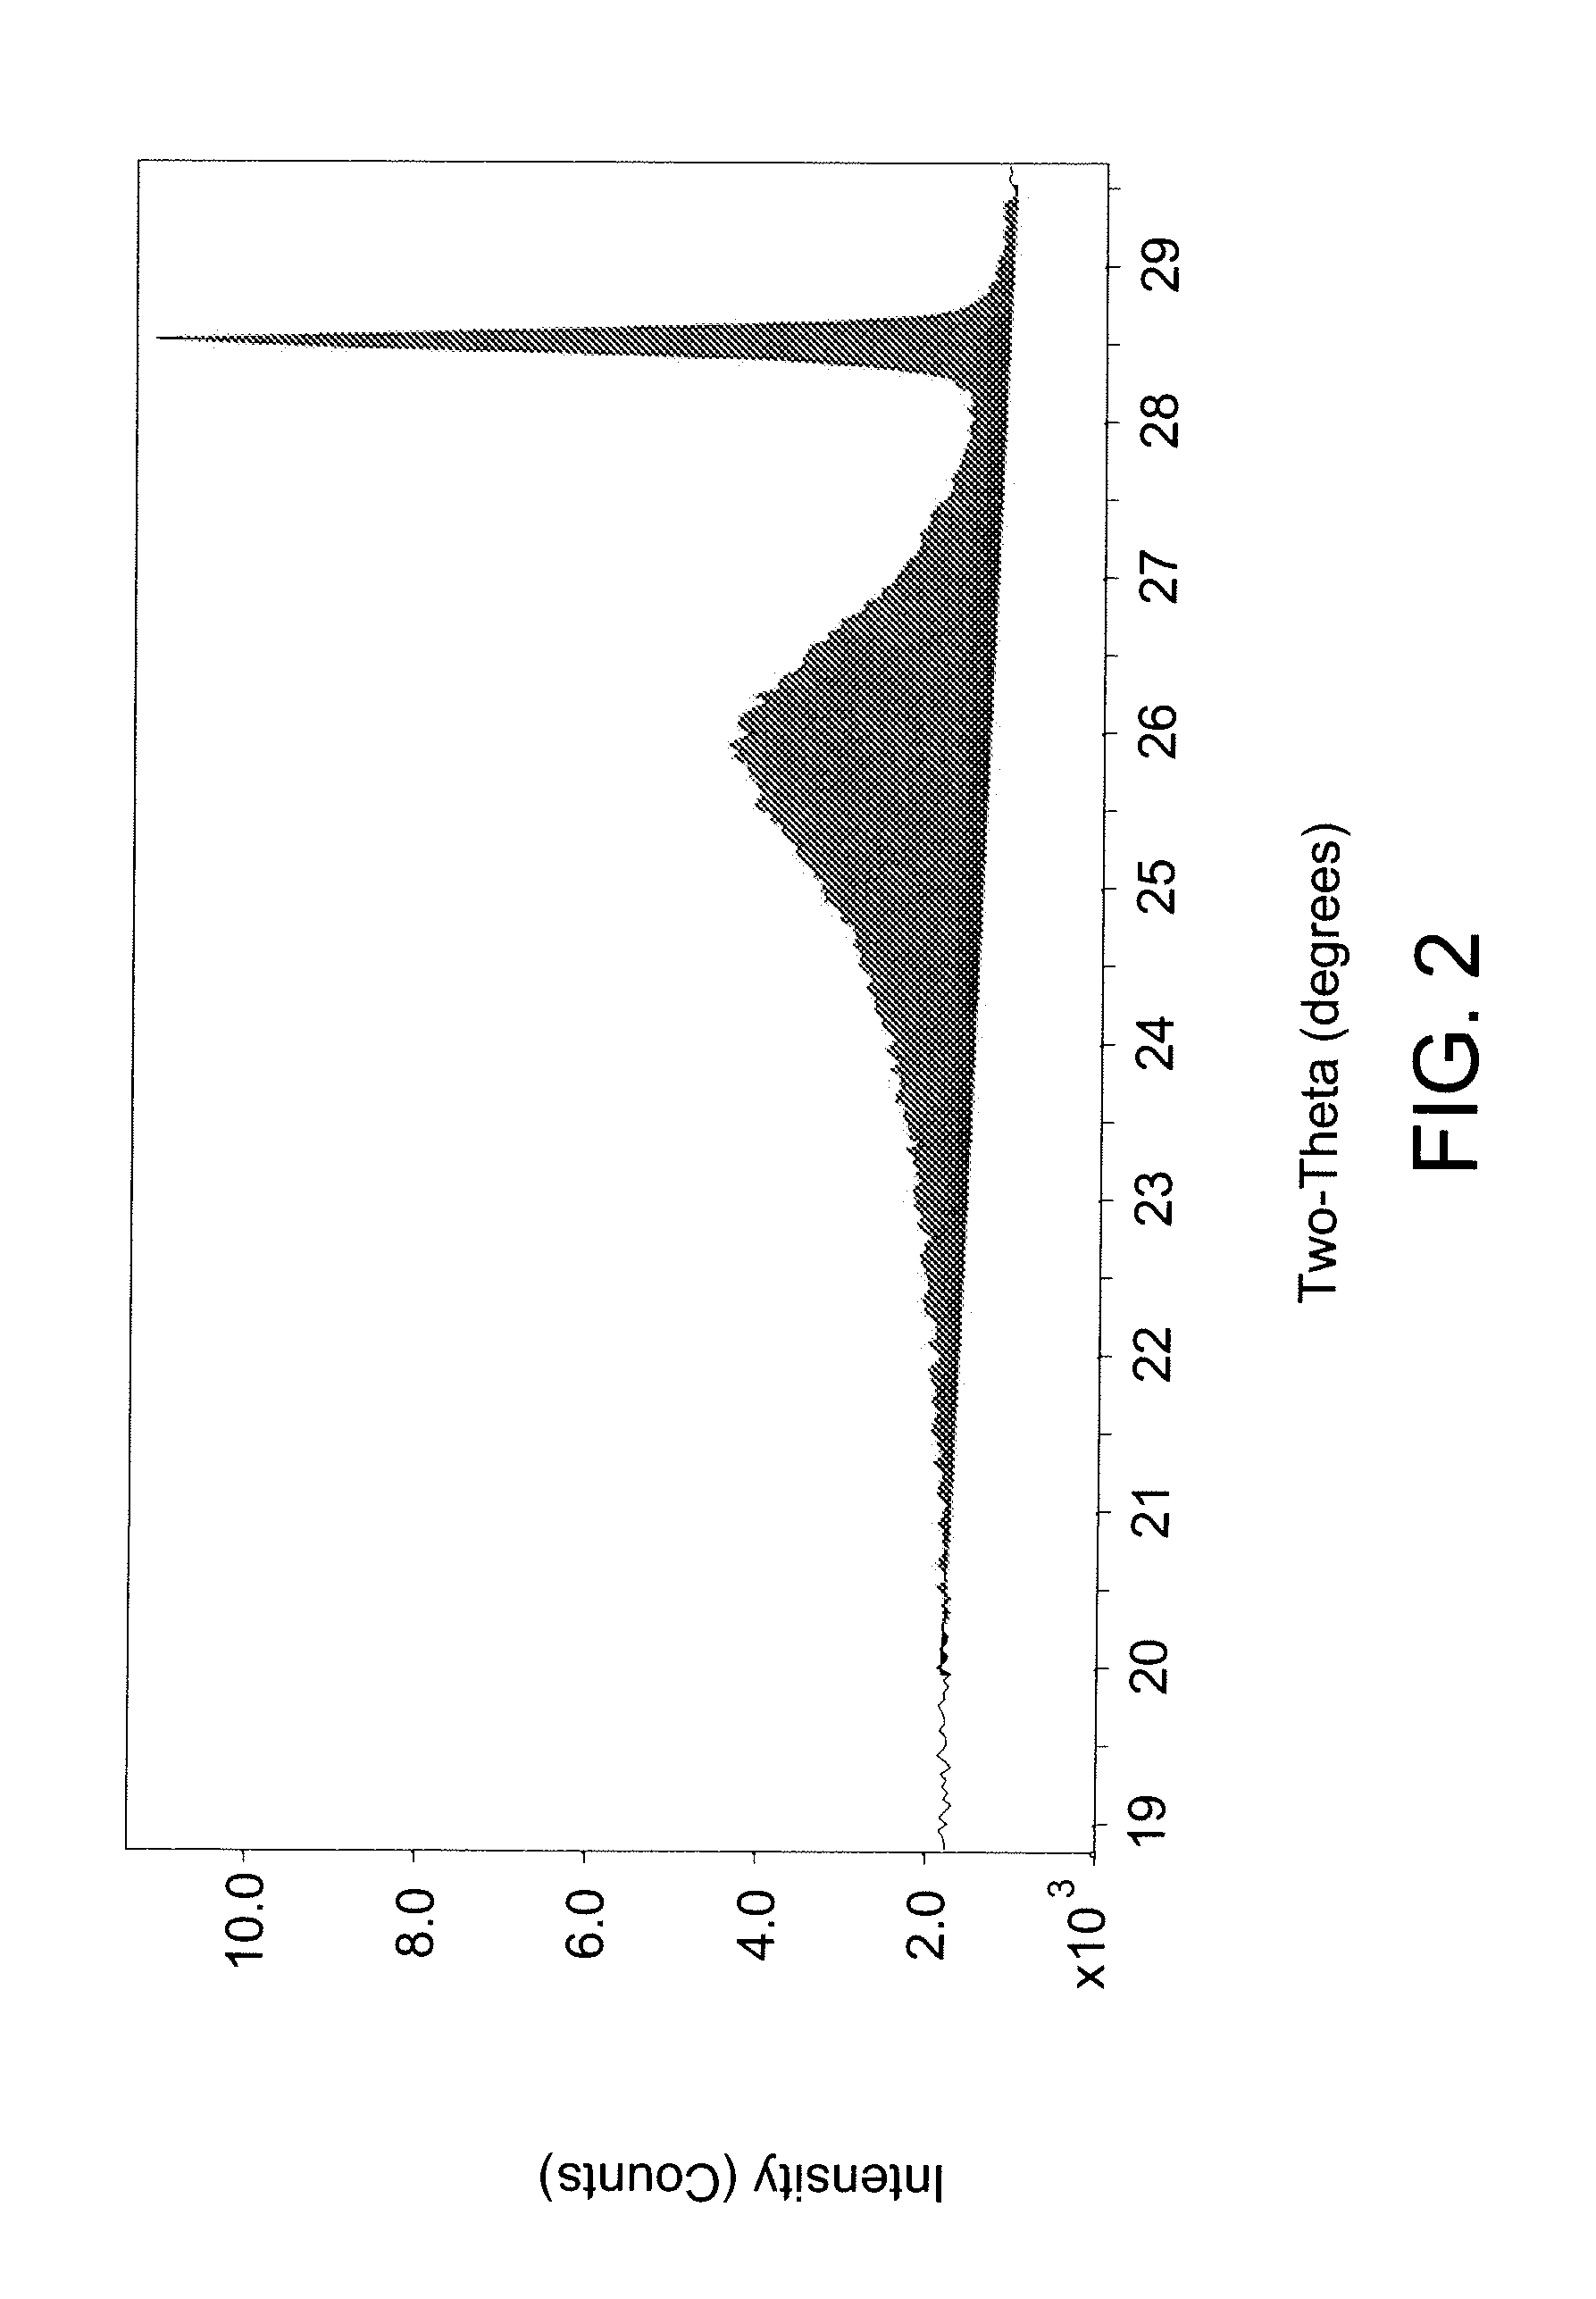 Process for Using Hydrated Iron Oxide and Alumina Catalyst for Slurry Hydrocracking